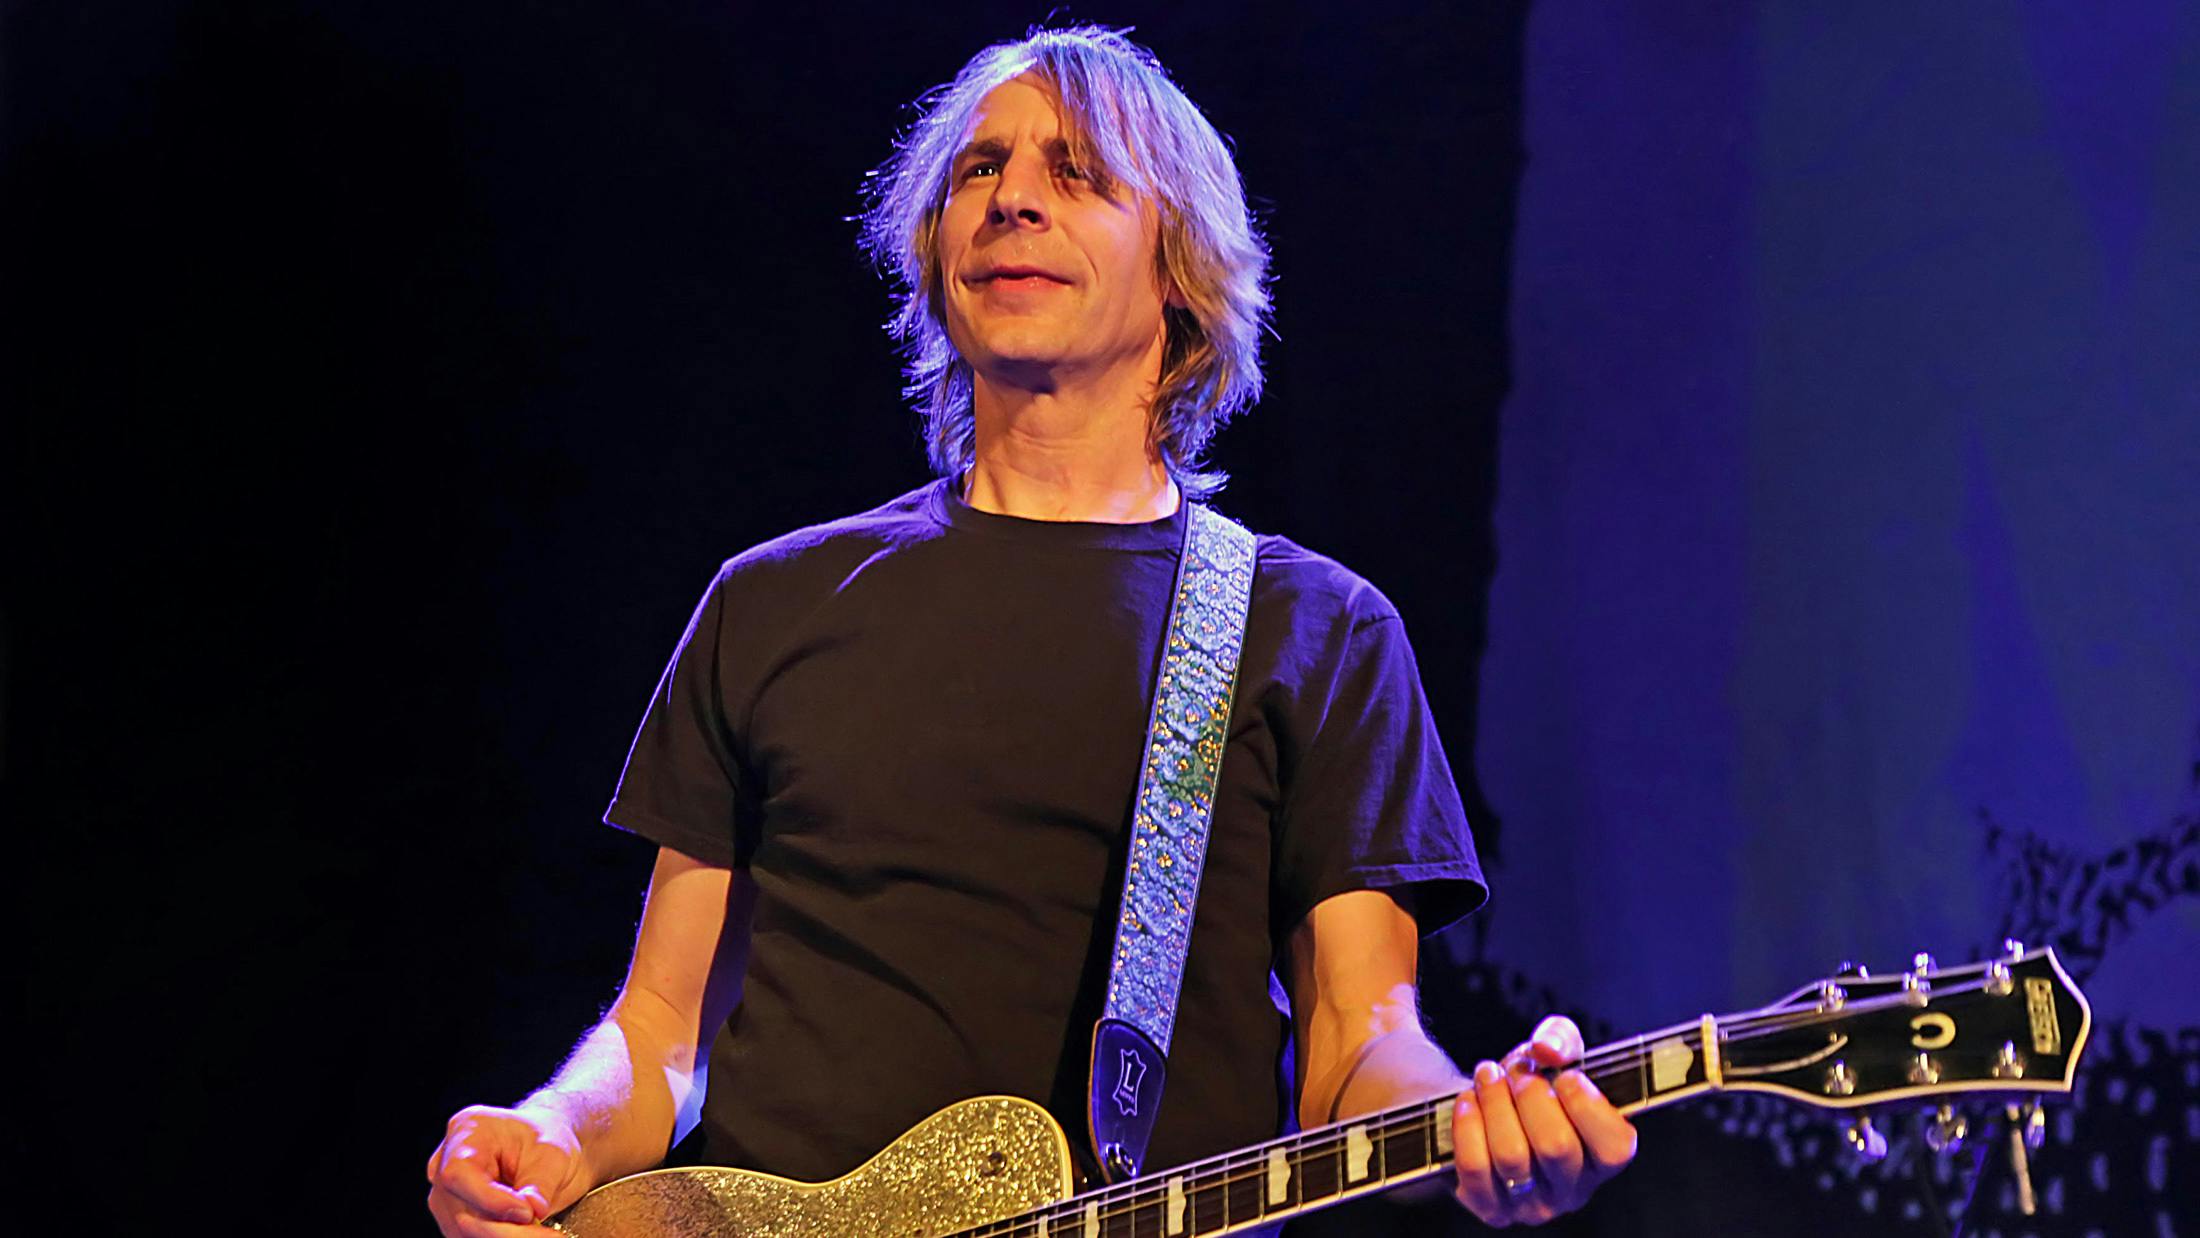 Mudhoney's Mark Arm: "I don't think we've ever taken anything seriously, including life!"